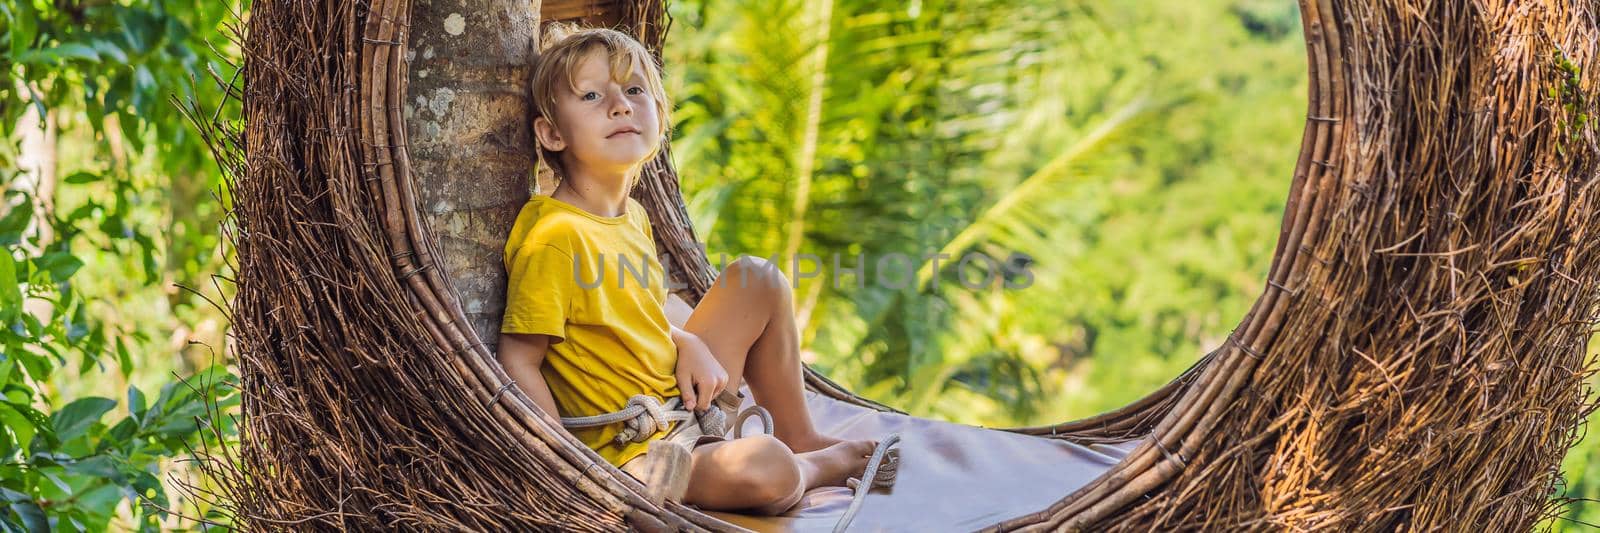 BANNER, LONG FORMAT Bali trend, straw nests everywhere. Child friendly place. Boy tourist enjoying his travel around Bali island, Indonesia. Making a stop on a beautiful hill. Photo in a straw nest, natural environment. Lifestyle. Traveling with kids concept. What to do with children by galitskaya